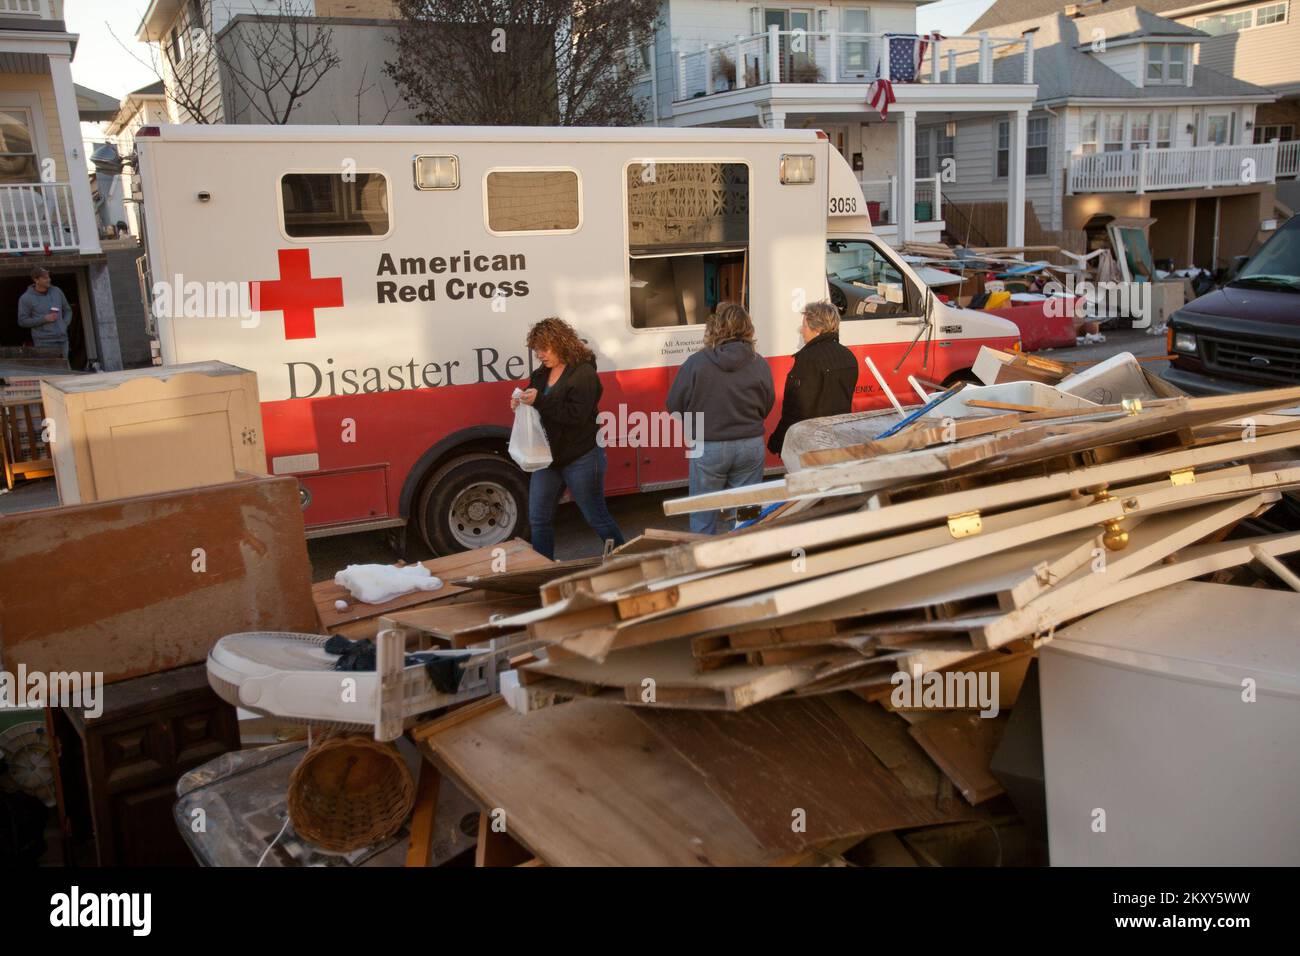 Long Island, N.Y., Nov. 9, 2012   The American Red Cross delivers food to Hurricane Sandy survivors in a Long Island neighborhood. The hurricane created widespread flooding, power outages and devastation to the area. FEMA is working with state and local officials to assist residents who were affected by Hurricane Sandy. Andrea Booher/FEMA. New York Hurricane Sandy. Photographs Relating to Disasters and Emergency Management Programs, Activities, and Officials Stock Photo